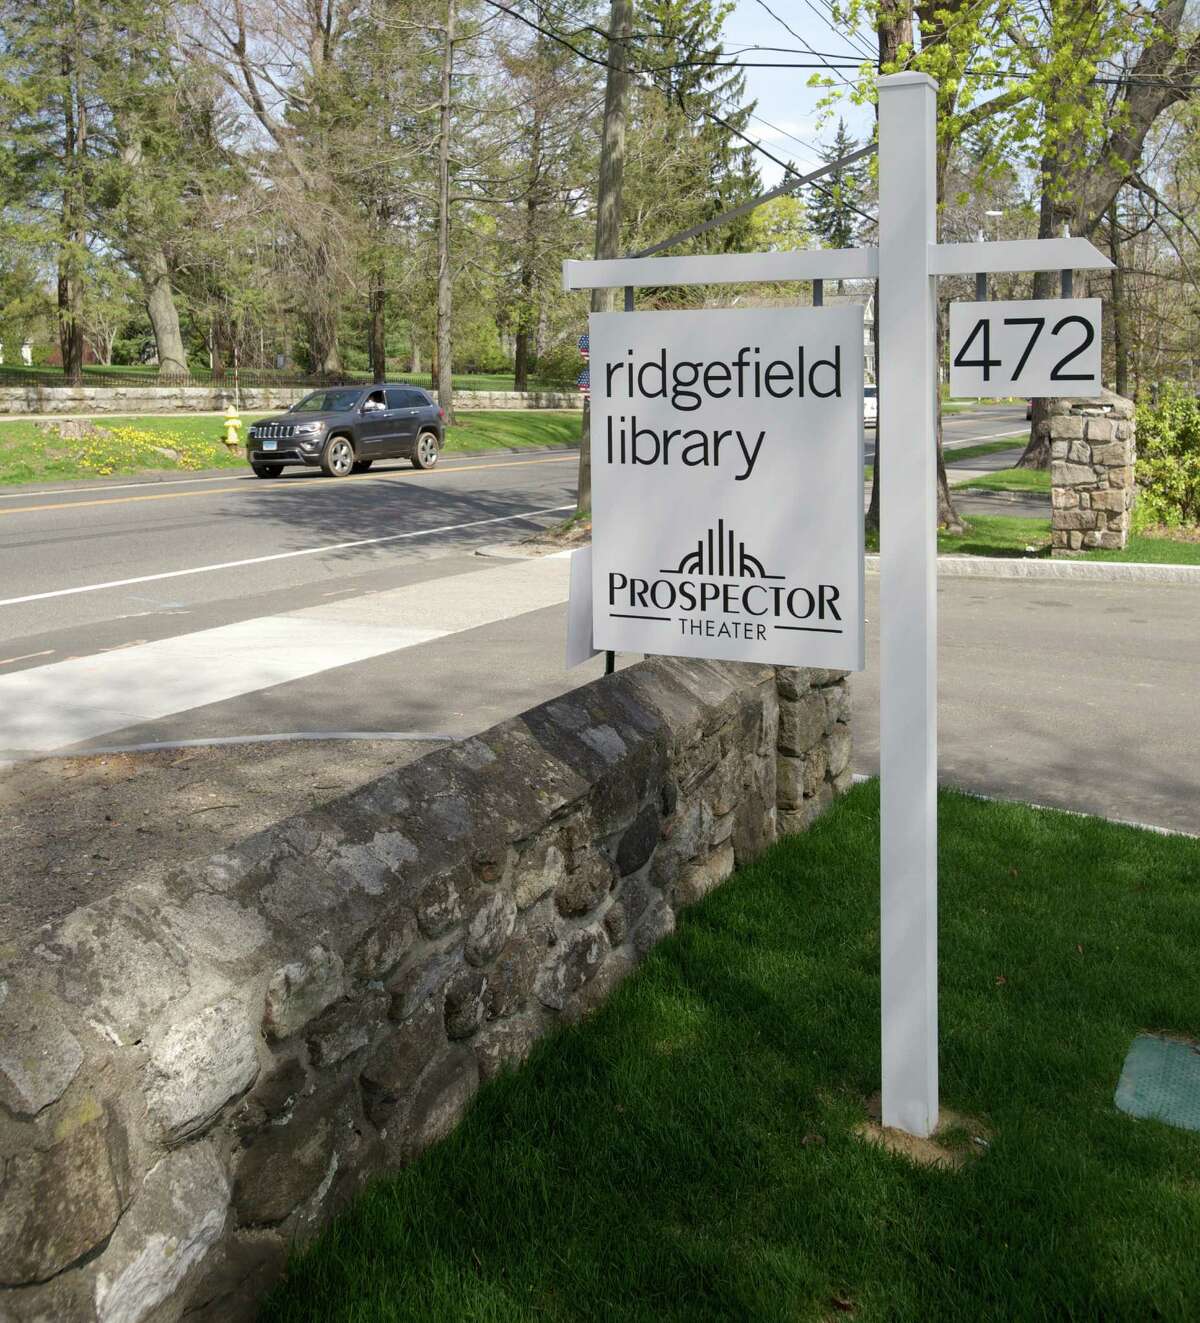 The new and improved Ridgefield Library will have its re-opening this weekend, May 9-11. The original 1903 building of the Ridgefield, Conn, library has been incorporated into a new 44,000 square foot library. Wednesday, May 7, 2014.